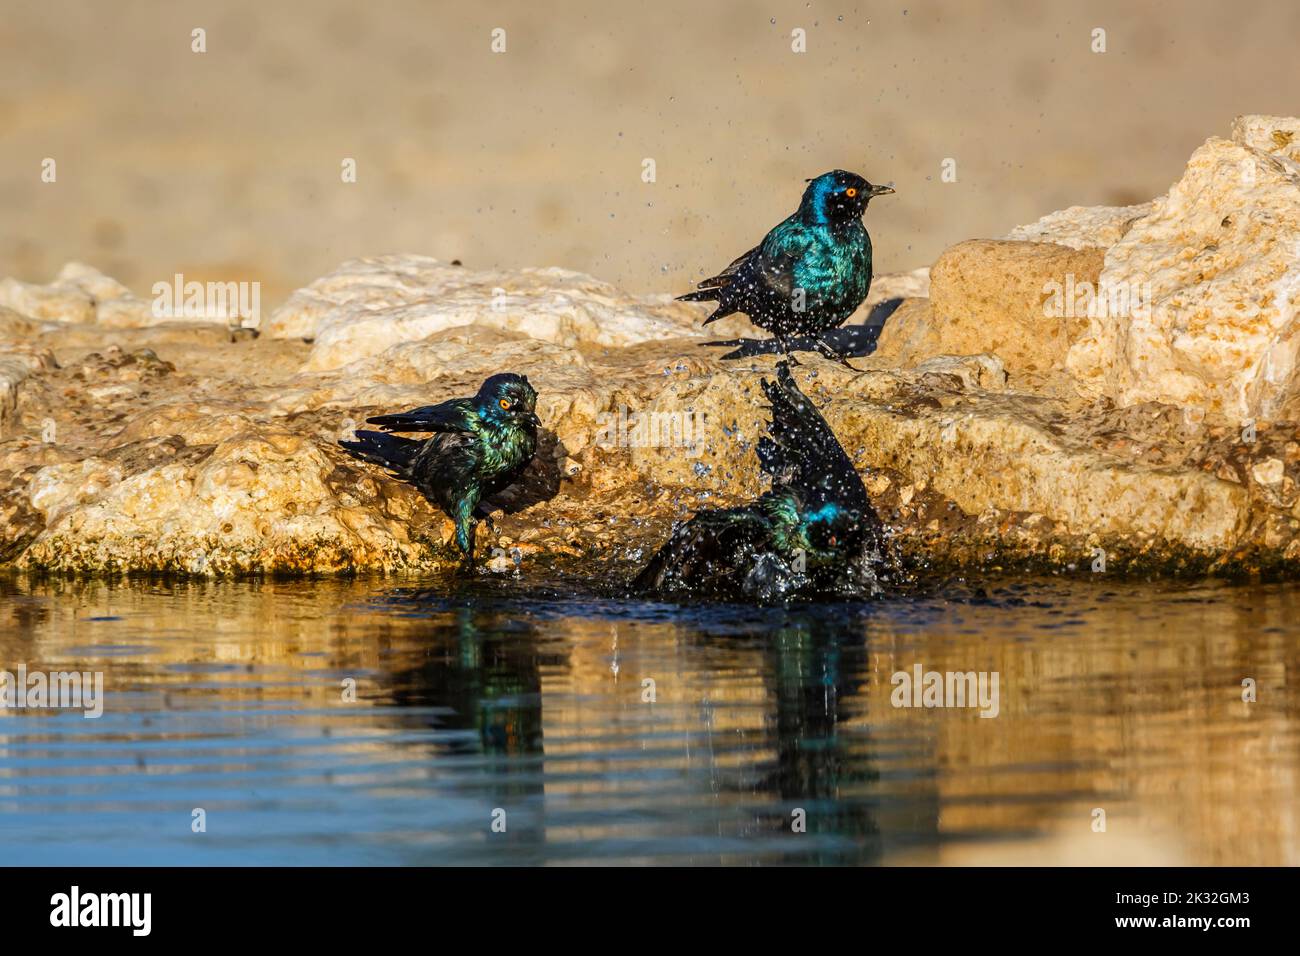 Three Cape Glossy Starling bathing in waterhole in Kgalagadi transfrontier park, South Africa; Specie Lamprotornis nitens family of Sturnidae Stock Photo